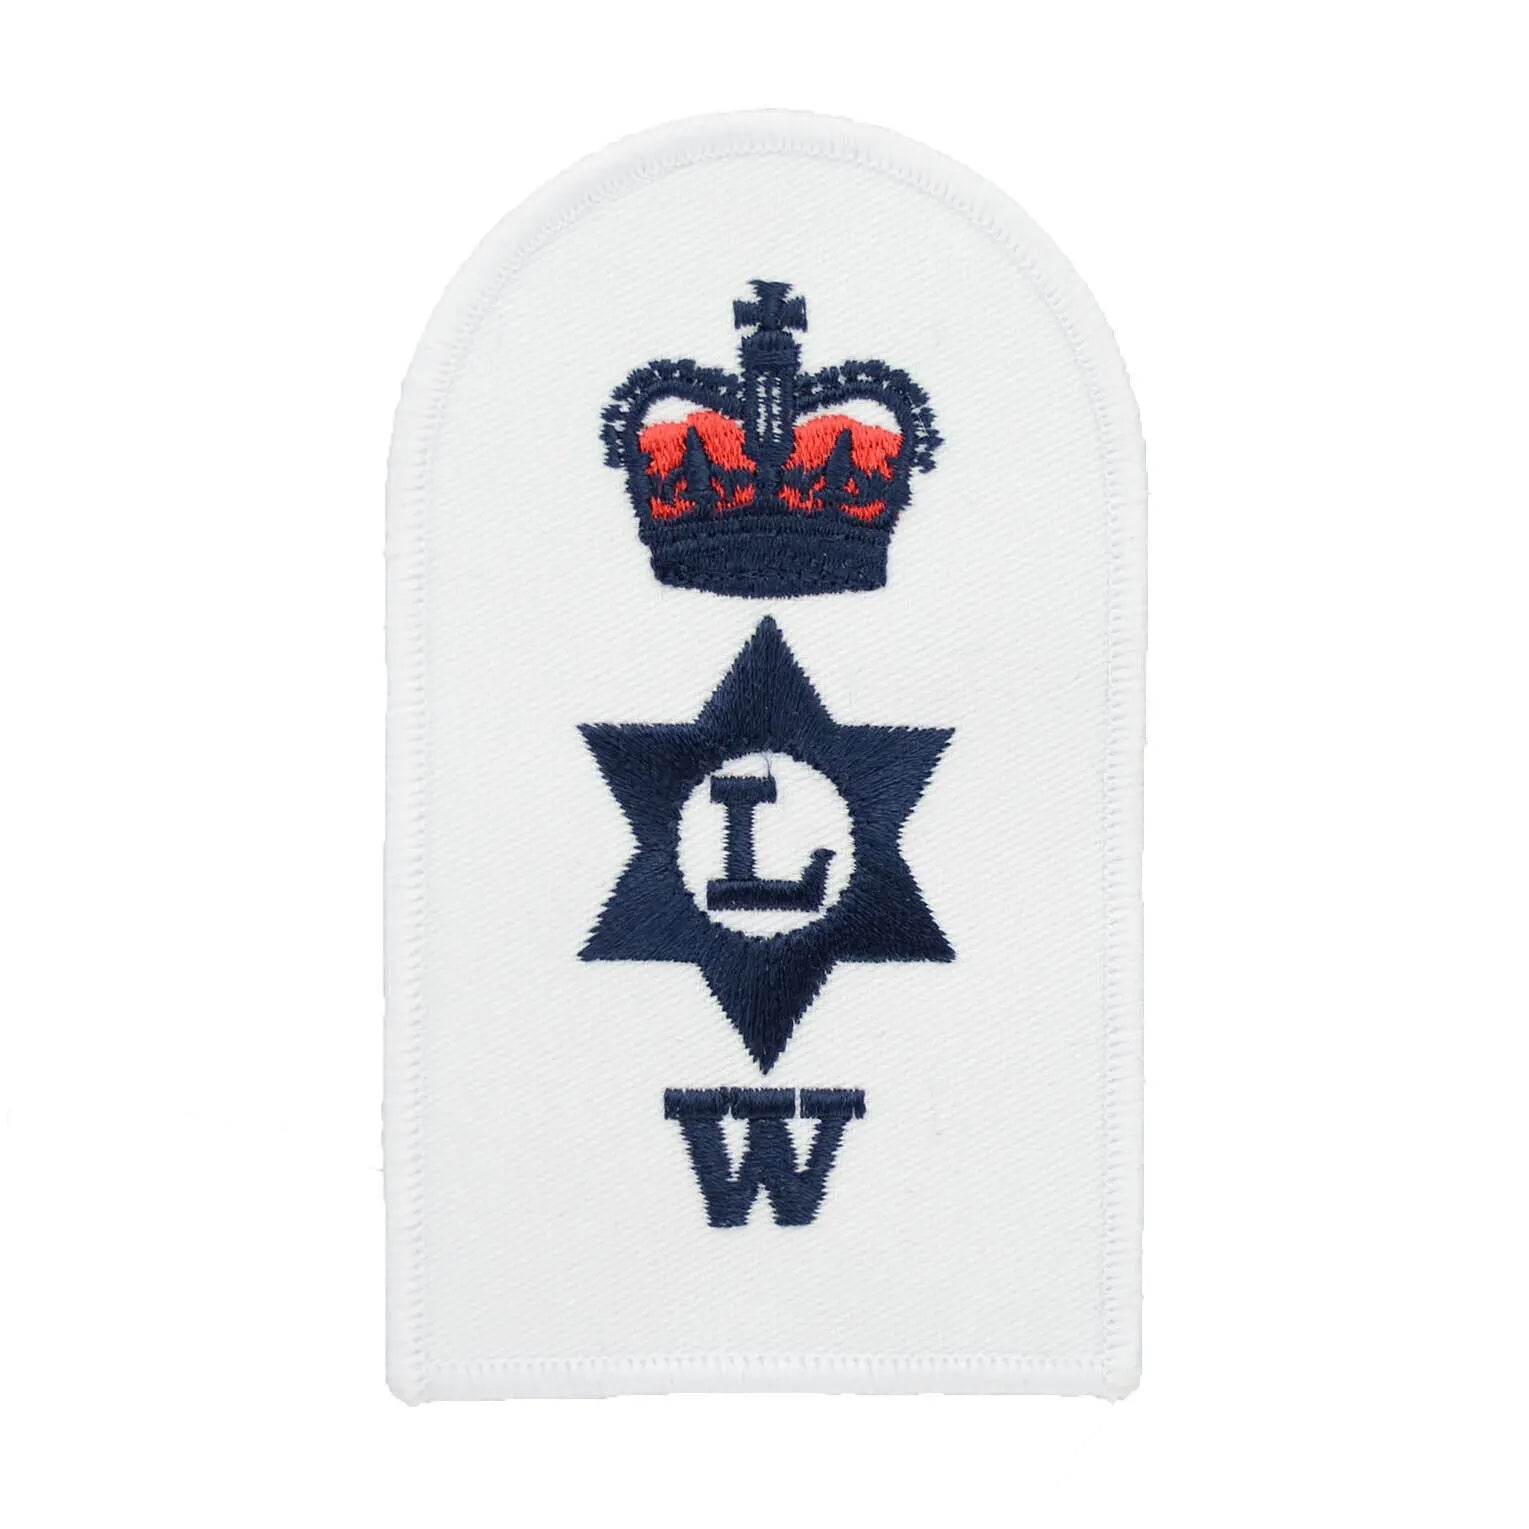 Logistics Supply Chain (SC) Petty Officer (PO) Royal Navy Badges | Wyedean